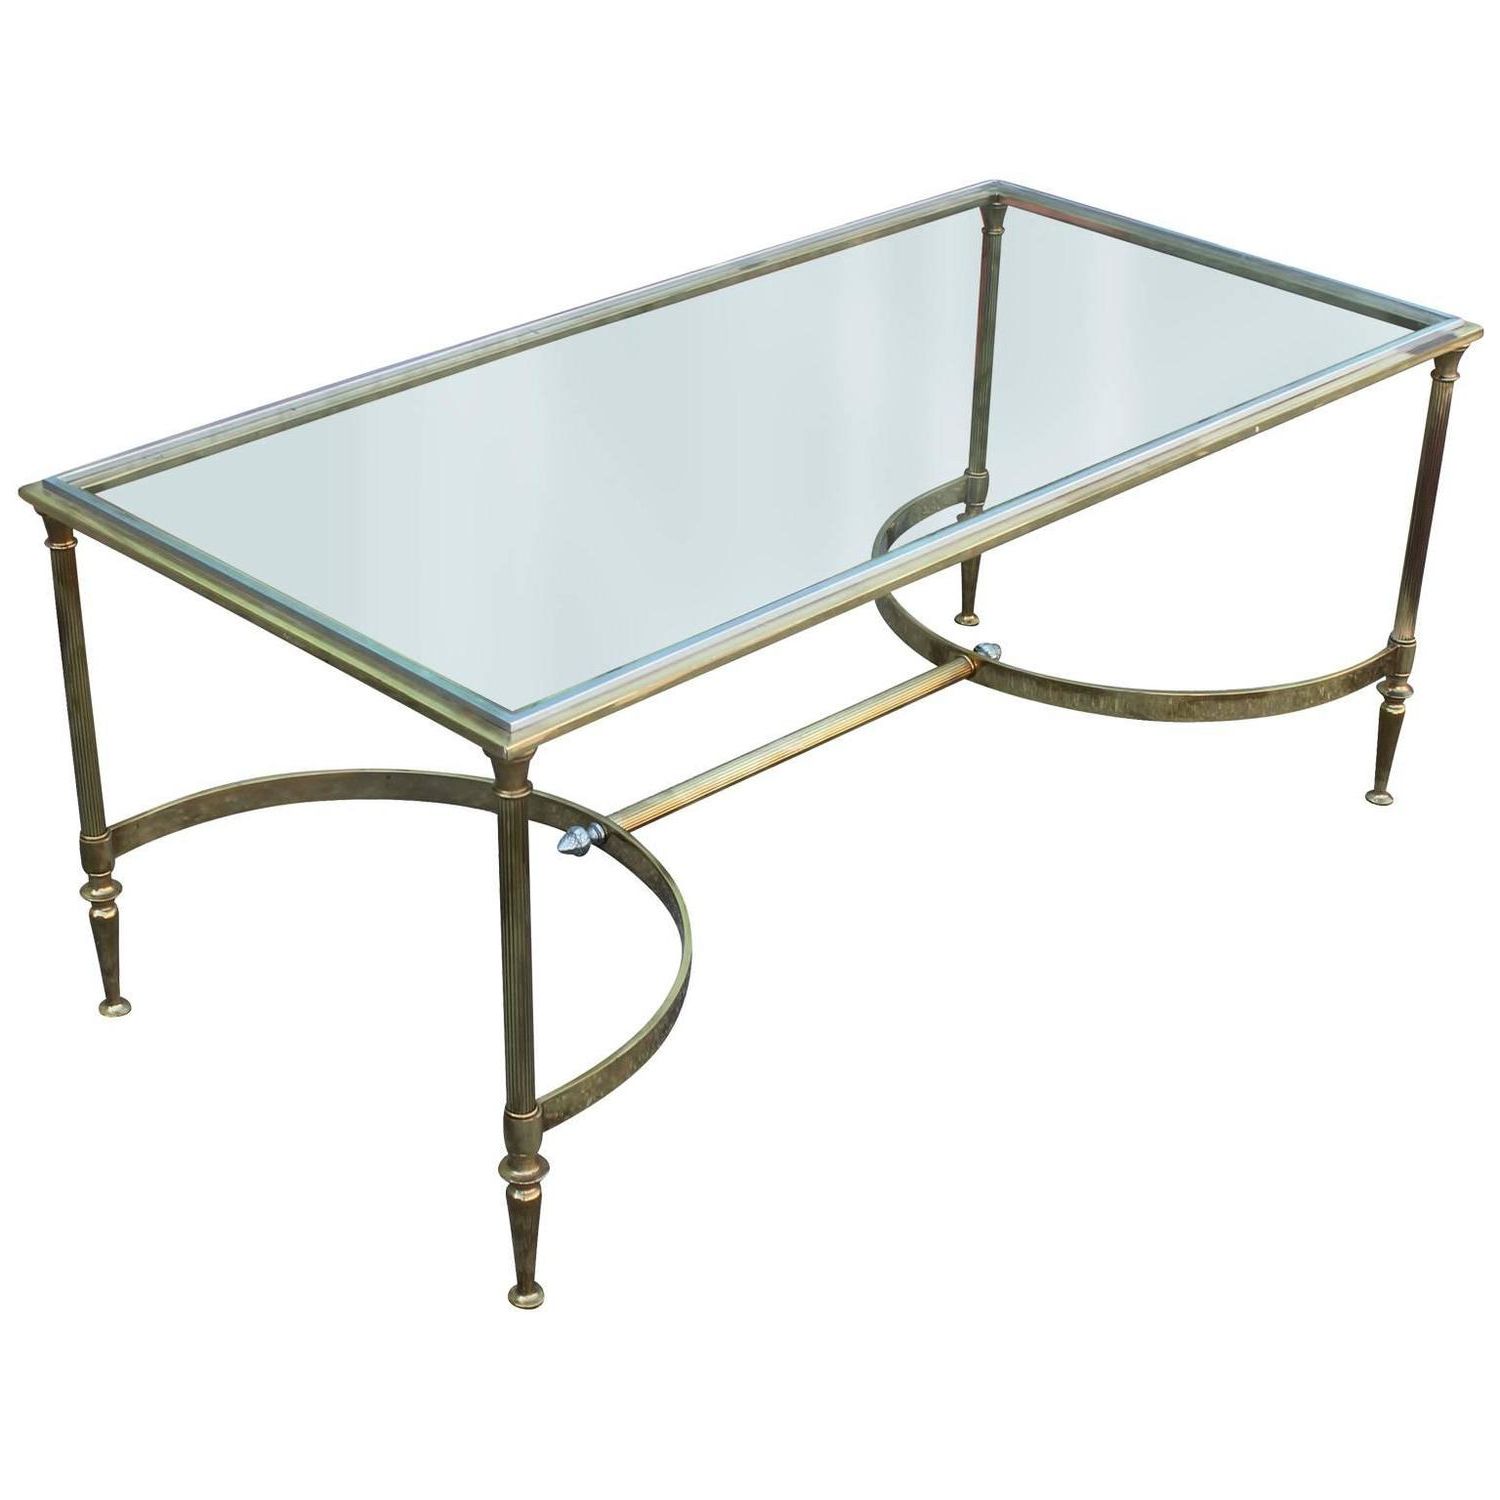 Elegant Brass And Glass Cocktail Table With Chrome Accents Throughout Preferred Glass And Chrome Cocktail Tables (View 6 of 20)